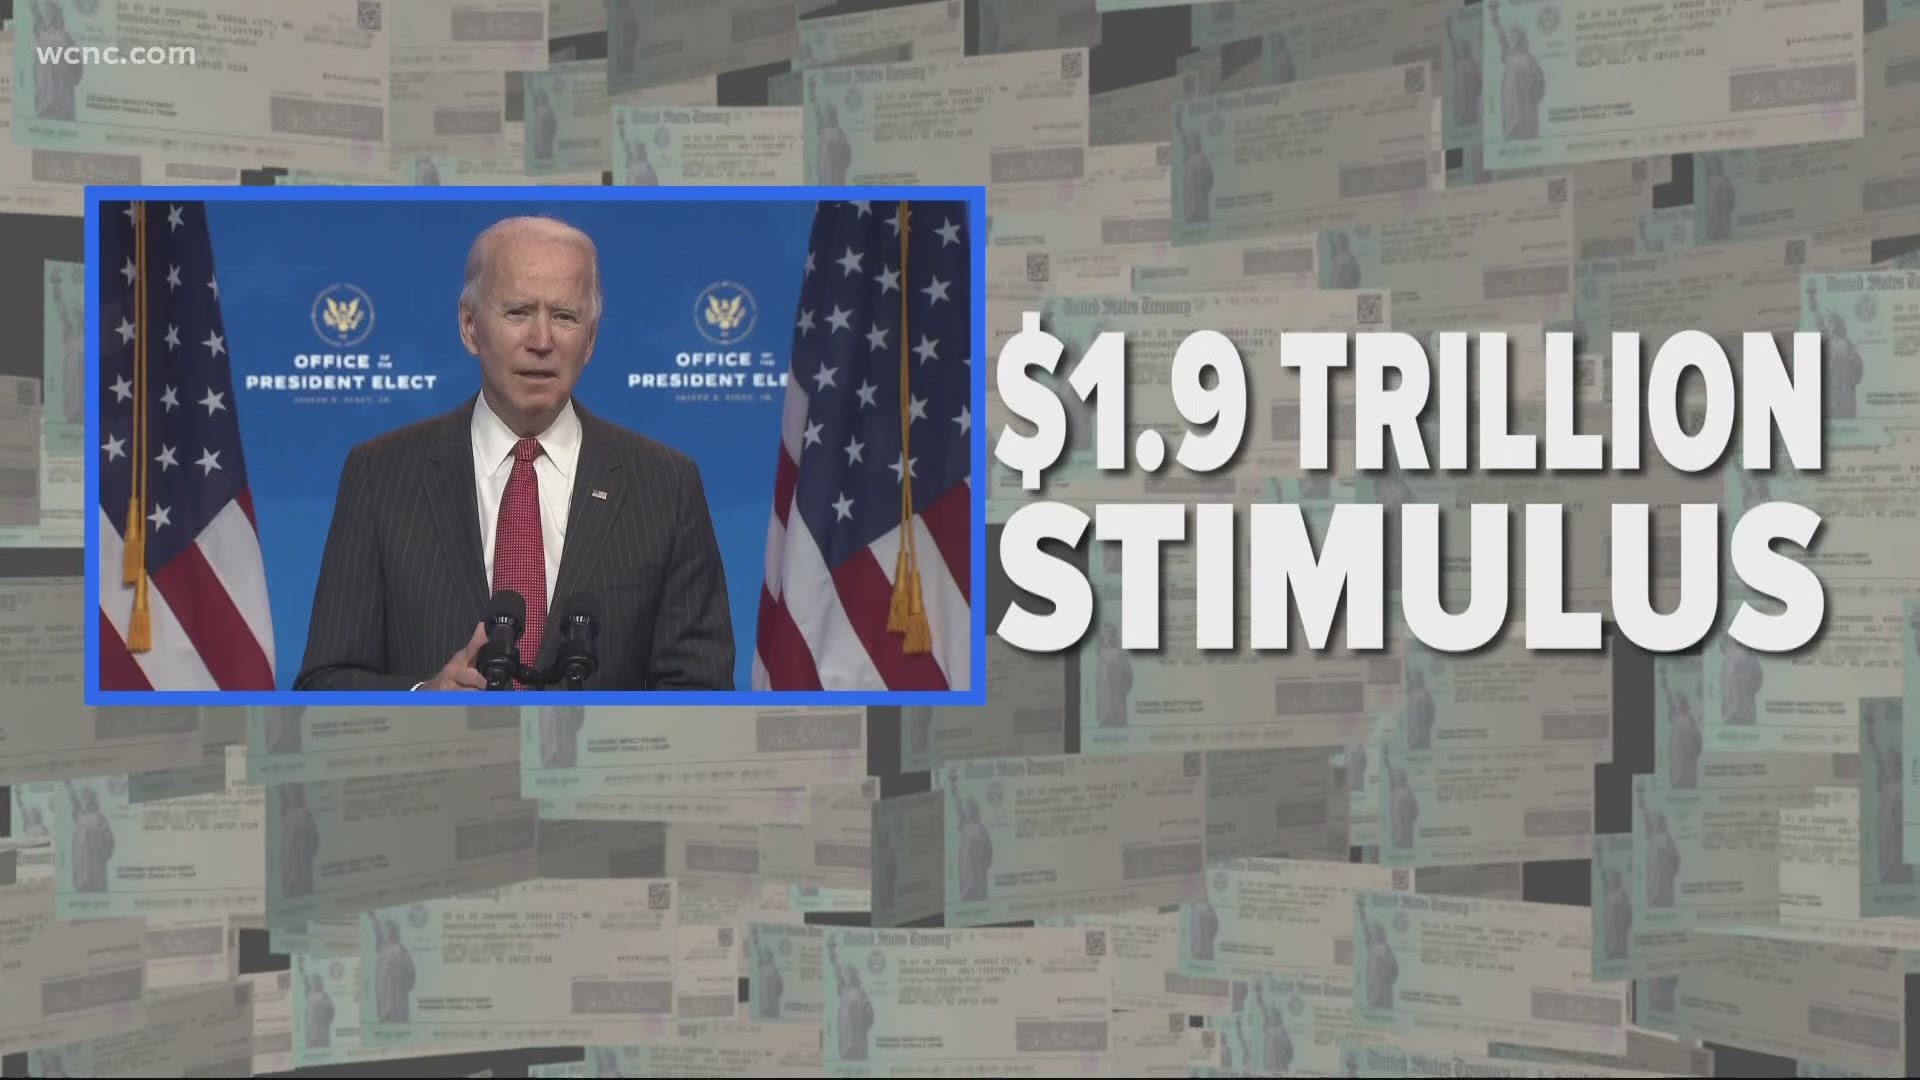 President Joe Biden is calling for a $1.9 trillion stimulus package that includes checks for most Americans. Here's what you could get if it passes.